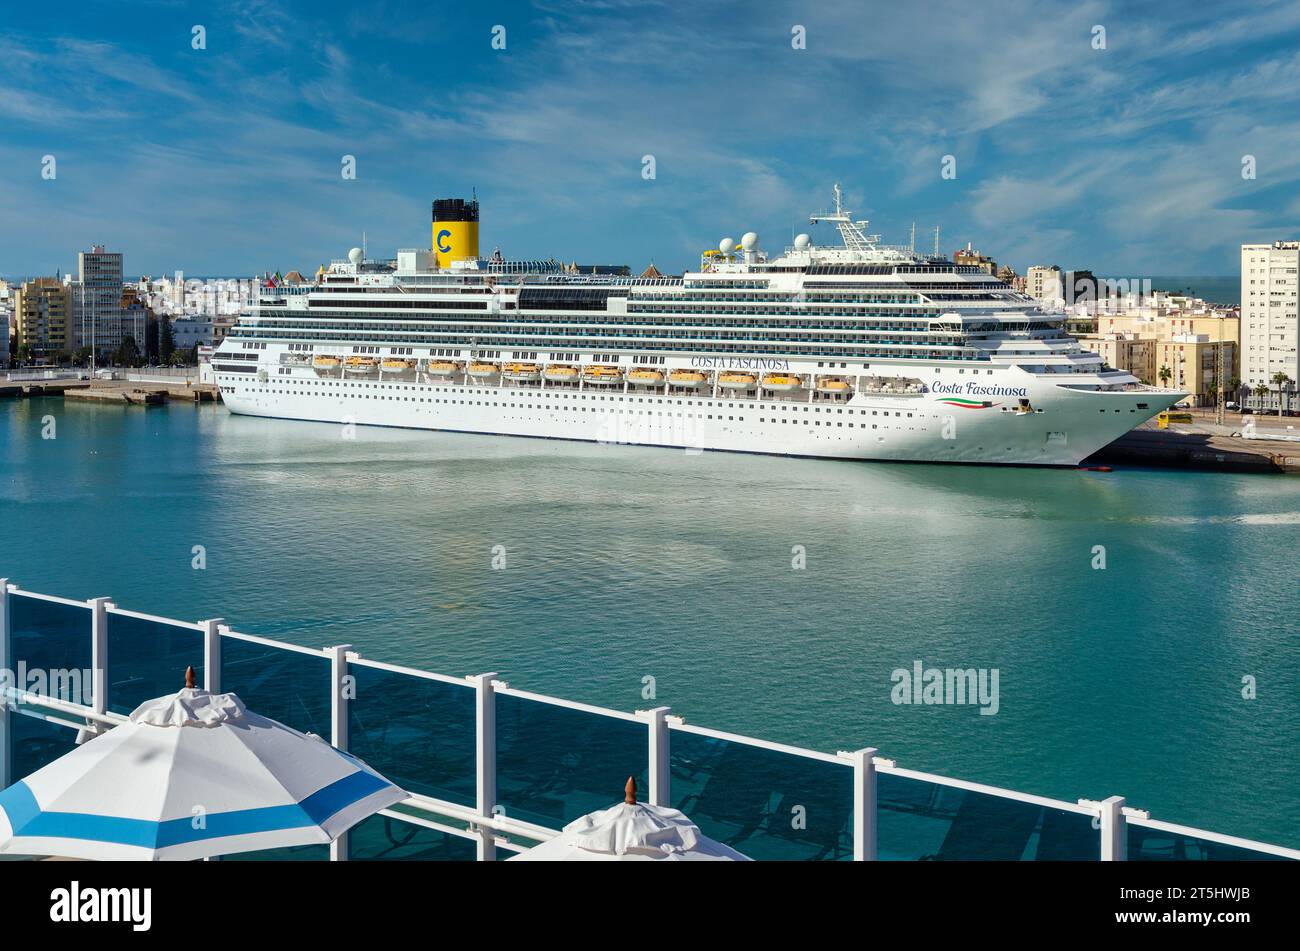 Cadiz, Spain; November 5, 2023: the Costa Fascinosa cruise ship in the harbor of Cadiz on a sunny day.  View from the Costa Firenze ship. Stock Photo